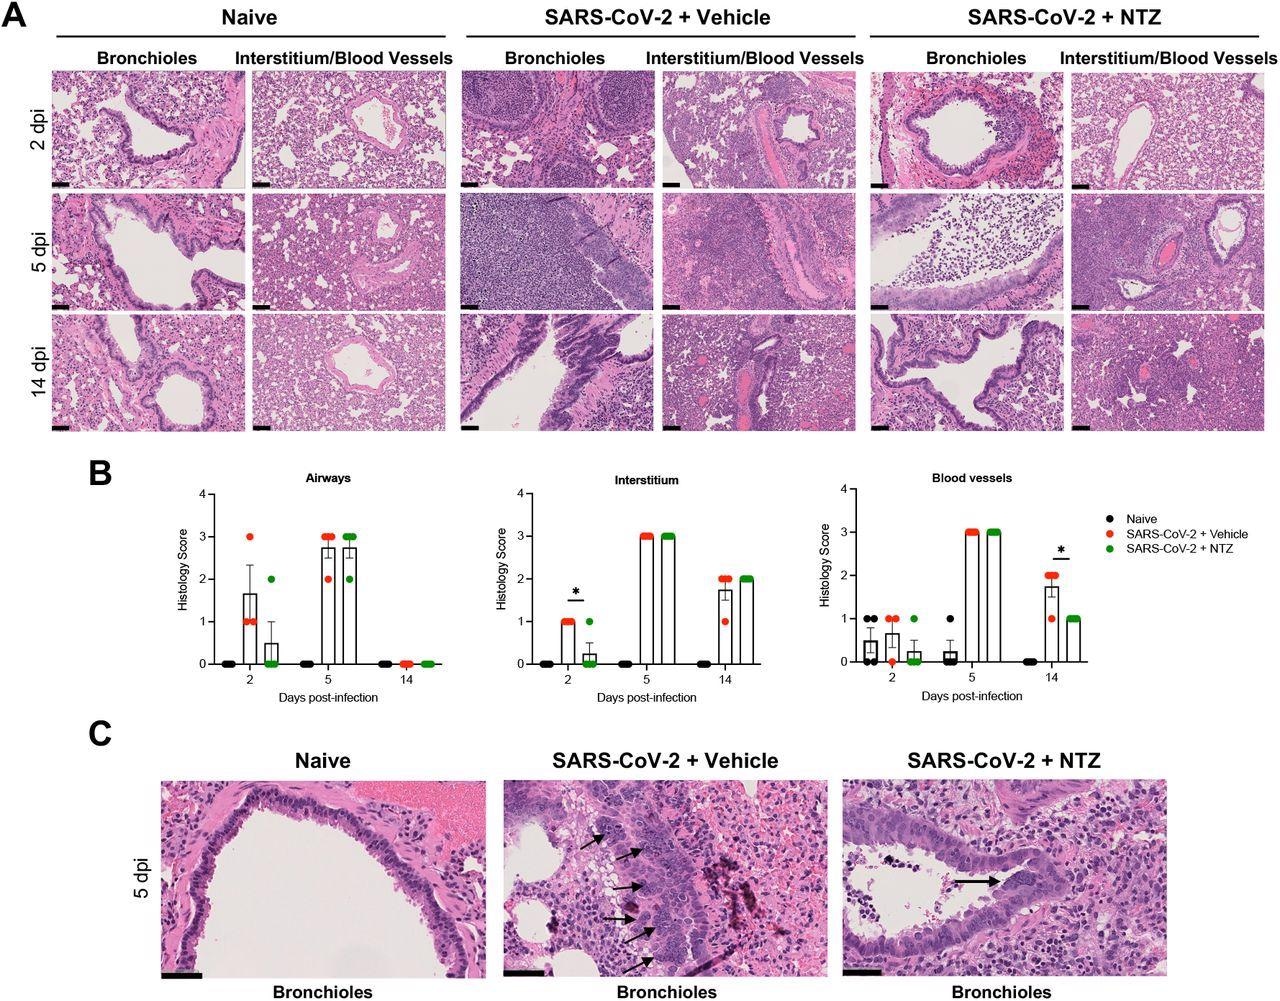 NTZ significantly prevents lung pathology SARS-CoV-2 infected Syrian hamsters. A. Comparison of normal lung (naïve) to pathologic changes induced by SARS-CoV-2 in vehicle-vs. NTZ-treated animals at day 2, 5, and 14 post-infection. Lung pathology at 5 dpi was severe irrespective of treatment group. B. NTZ significantly reduced interstitial inflammatory and perivascular scores at 2 and 14 days post-infection. Qualitatively there was decreased bronchiole epithelial injury and associated luminal inflammatory exudate. Lung pathology at 5 dpi was severe irrespective of treatment group. Asterisk indicates statistically significant differences by one-tailed unpaired Student’s t-test at day 2 for interstitium and on day 14 for blood vessels. Lungs from 4 animals were included in the scoring analysis for each timepoint except for 2 dpi, where there were 3 SARS-CoV-2 PBS/vehicle-treated animals. C. Bronchiole syncytial cells were observed exclusively at 5 dpi in SARS-CoV-2-inoculated animals and were more frequently observed in the vehicle treated group. Scale bars: A, 100 μm; C, 50 μm.